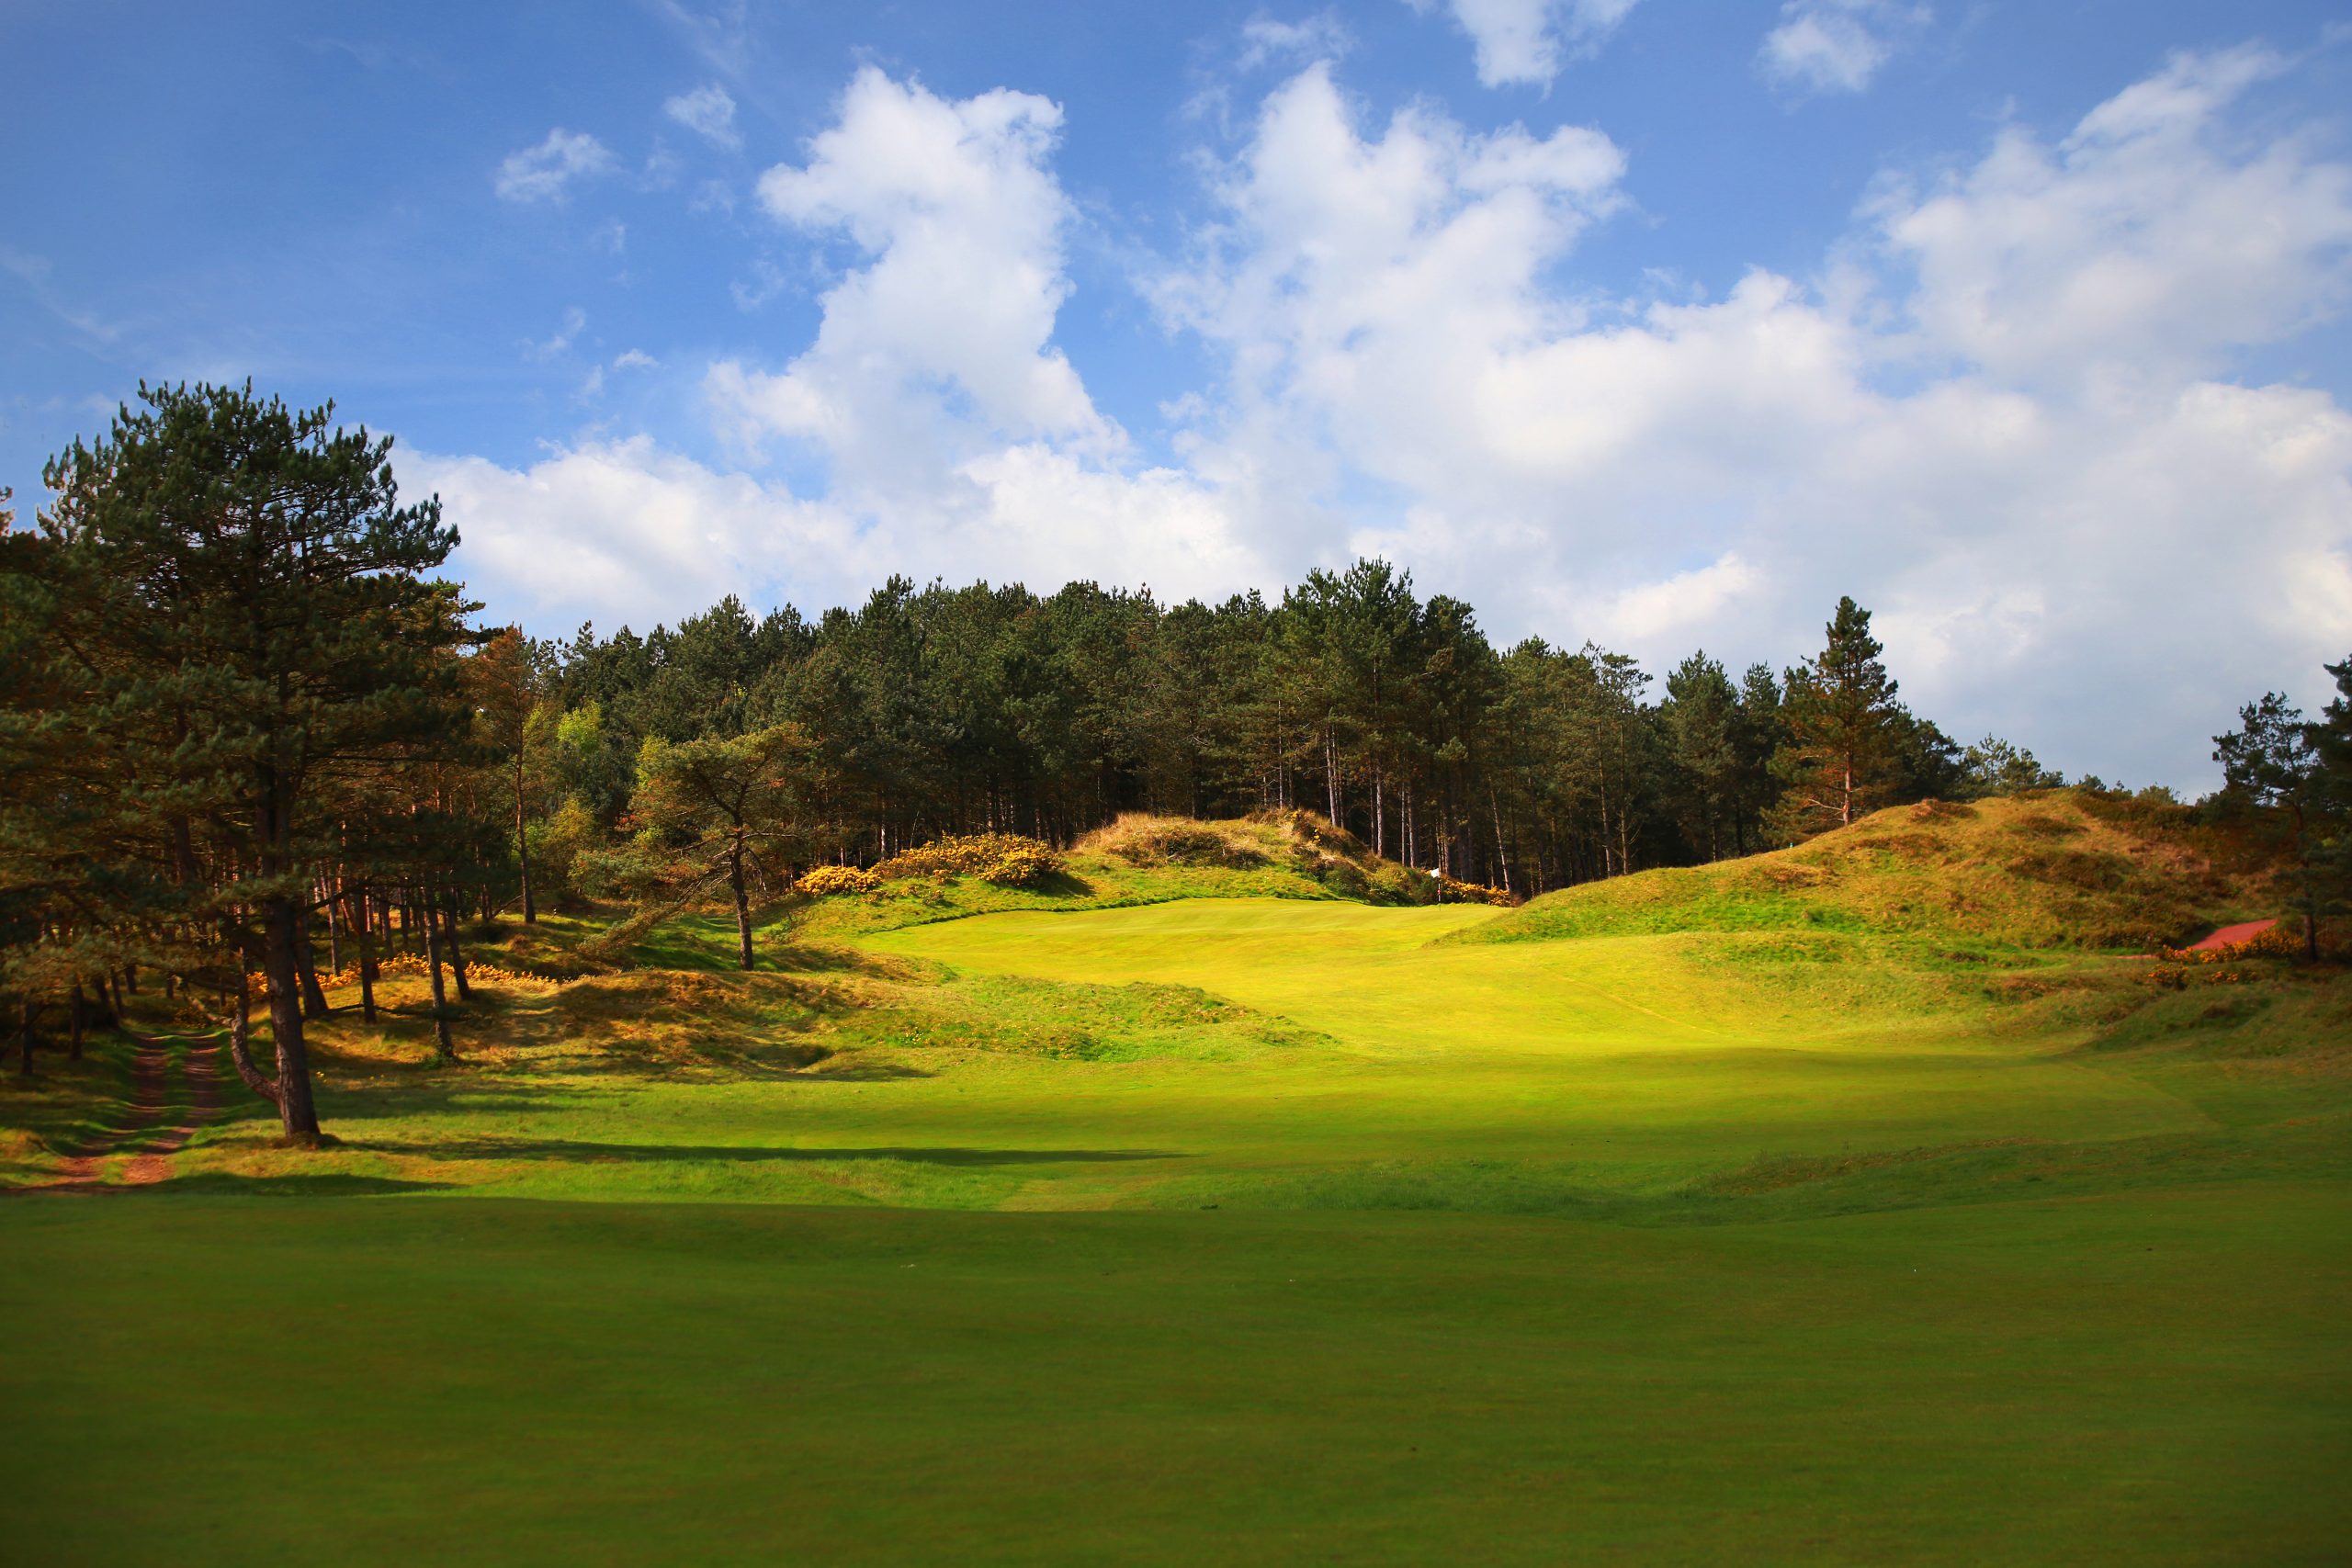 A patch of sunlight lights up the fairway at Formby Golf Club